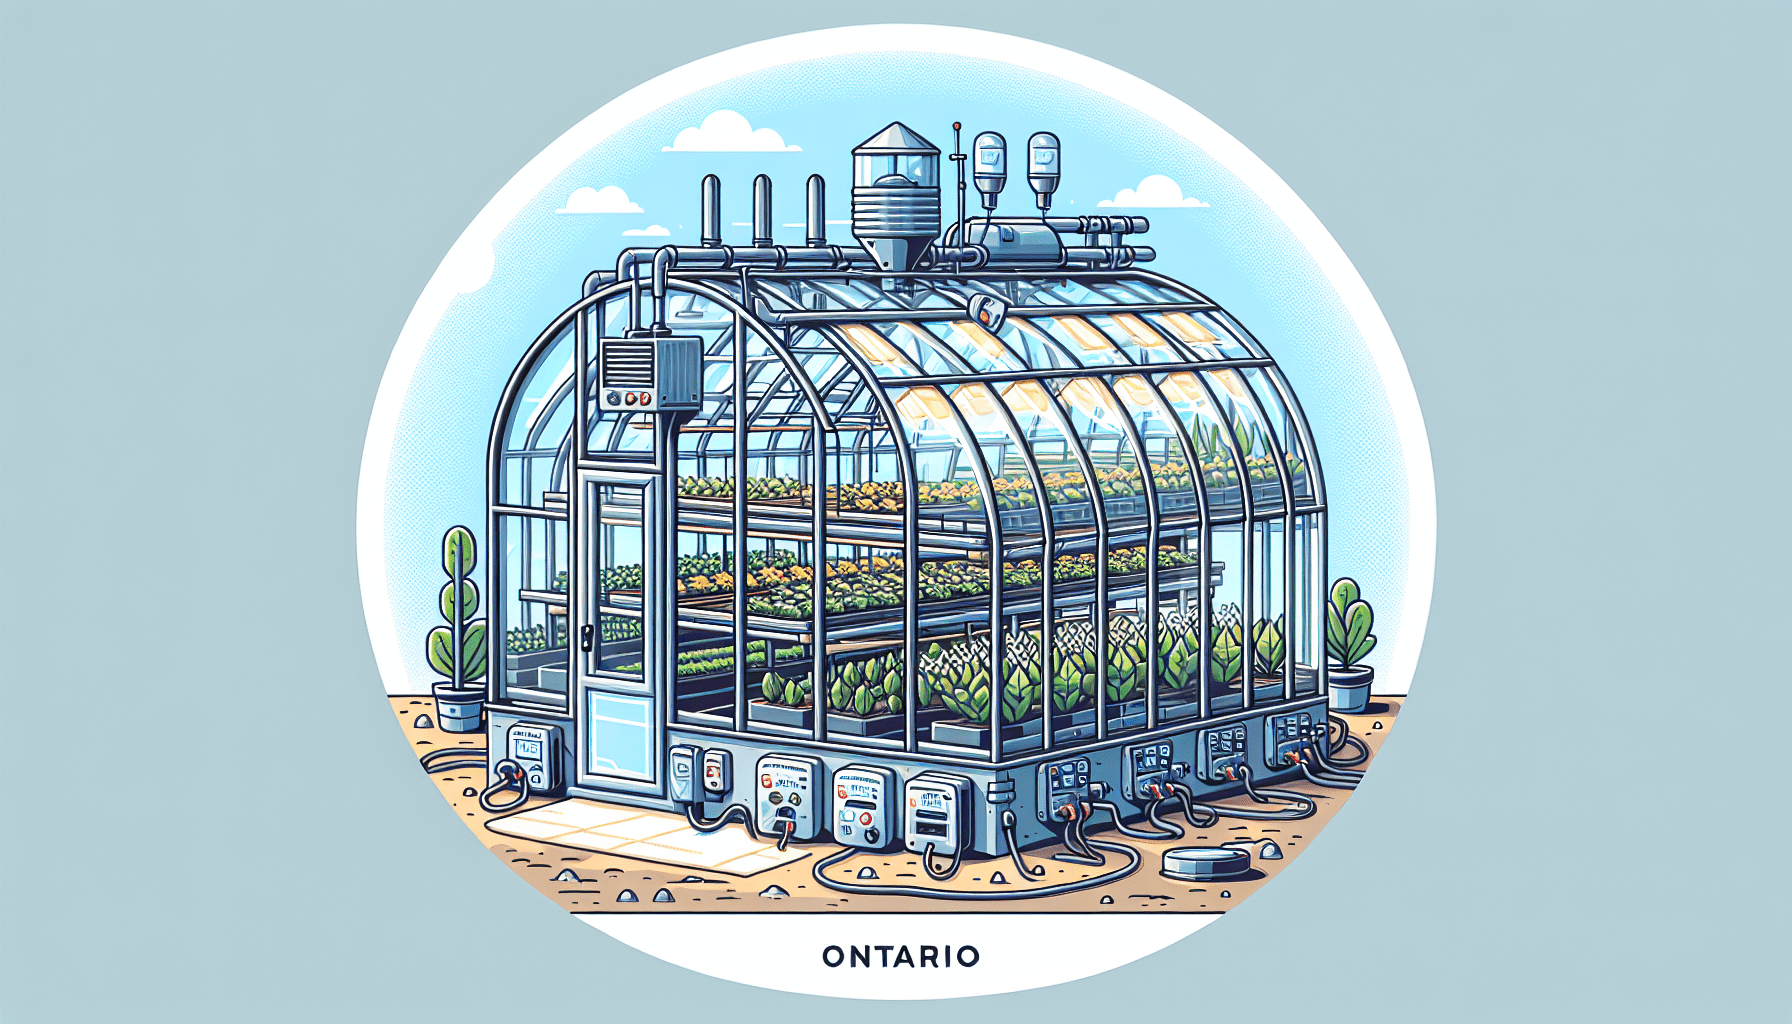 Greenhouse Gardening Techniques for Ontario